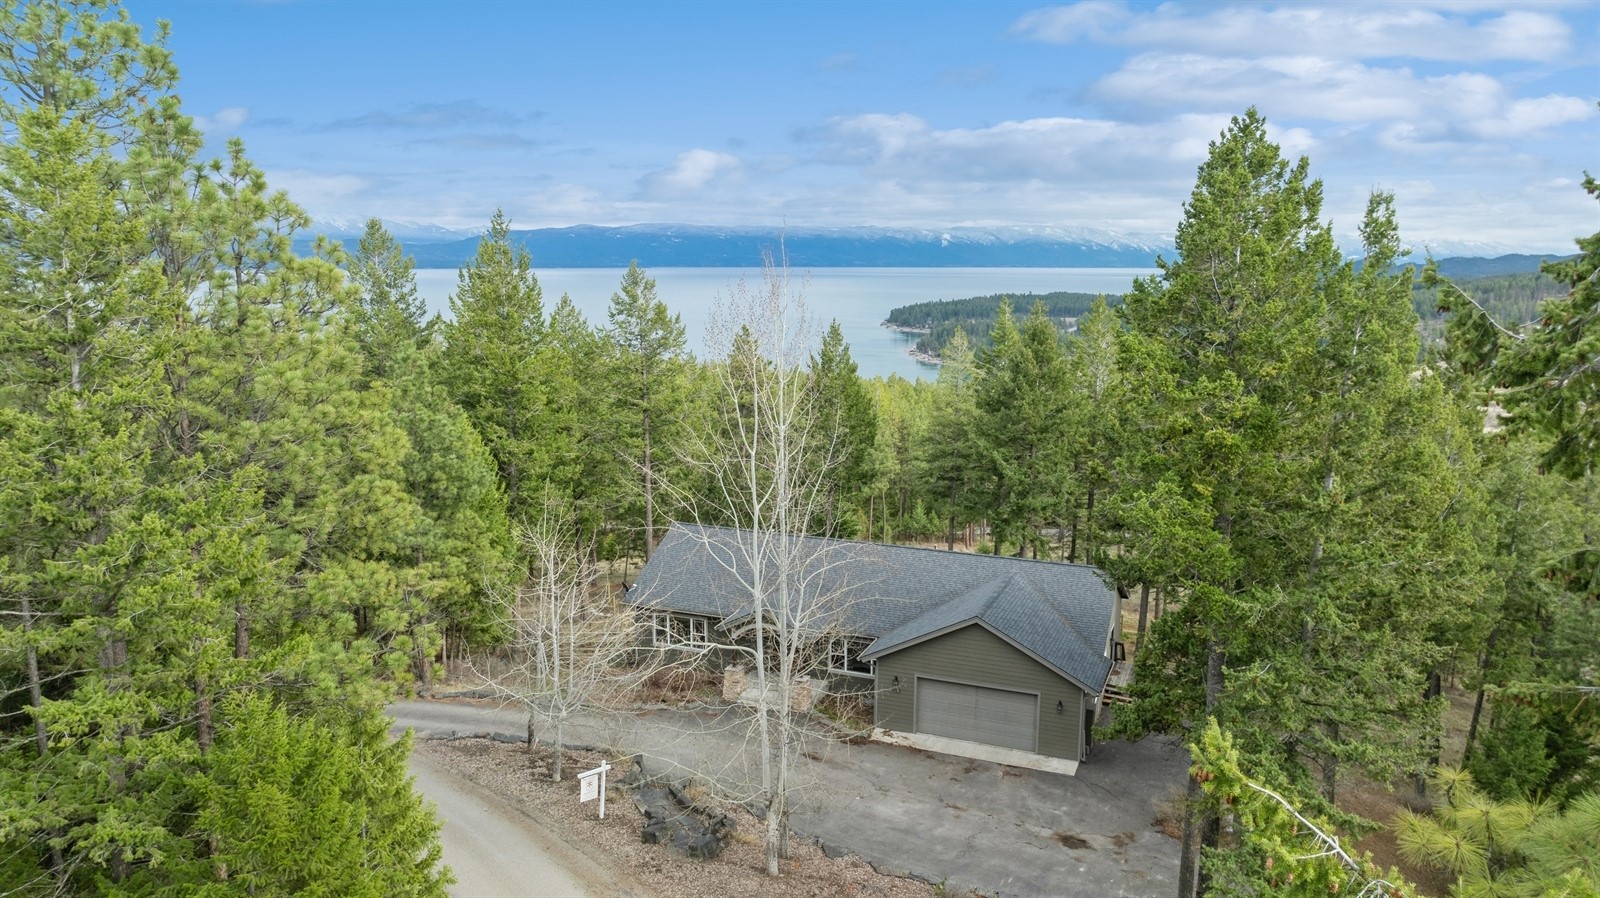 Welcome home! This 3,300 sq foot home boasts fantastic views of Flathead Lake and sitting on 4.96 acres with a 30x40 shop what else do you need? If that's not appealing, check out the 4 bedrooms and 3 bathrooms! Nicely laid out with ample room for guests and cookouts. Spend your summer nights by the campfire, take a deep breath and relax. Within minuets to Lakeside and Somers, its the perfect home in the perfect location. Did you just wash your car? No worries there, with paved access from the highway to the house! Do you have toys? We have you covered with the oversized attached garage!